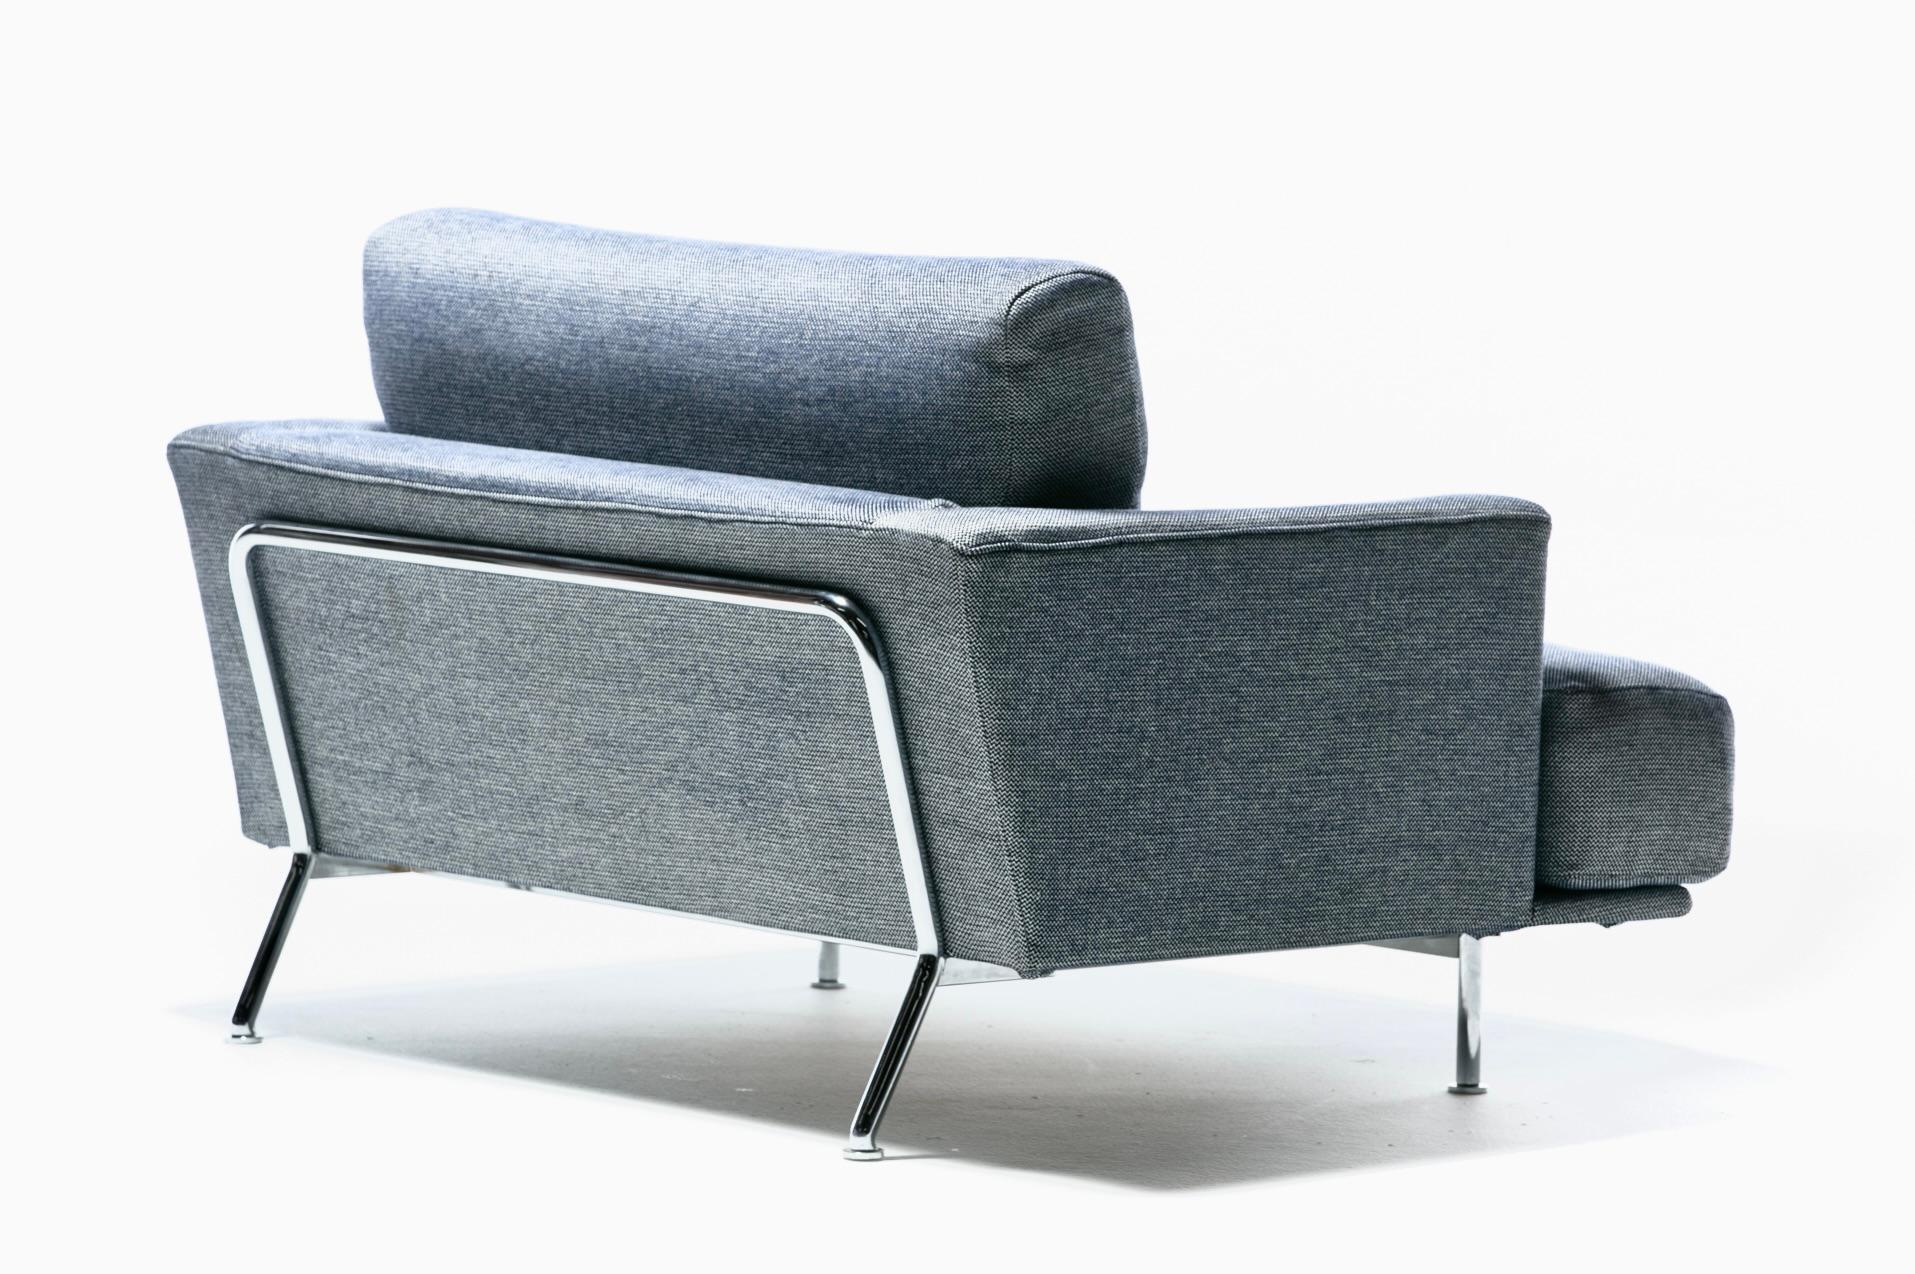 Pair of Imported Italian Modern Cassina 253 Nest Lounge Chairs by Piero Lissoni  For Sale 4